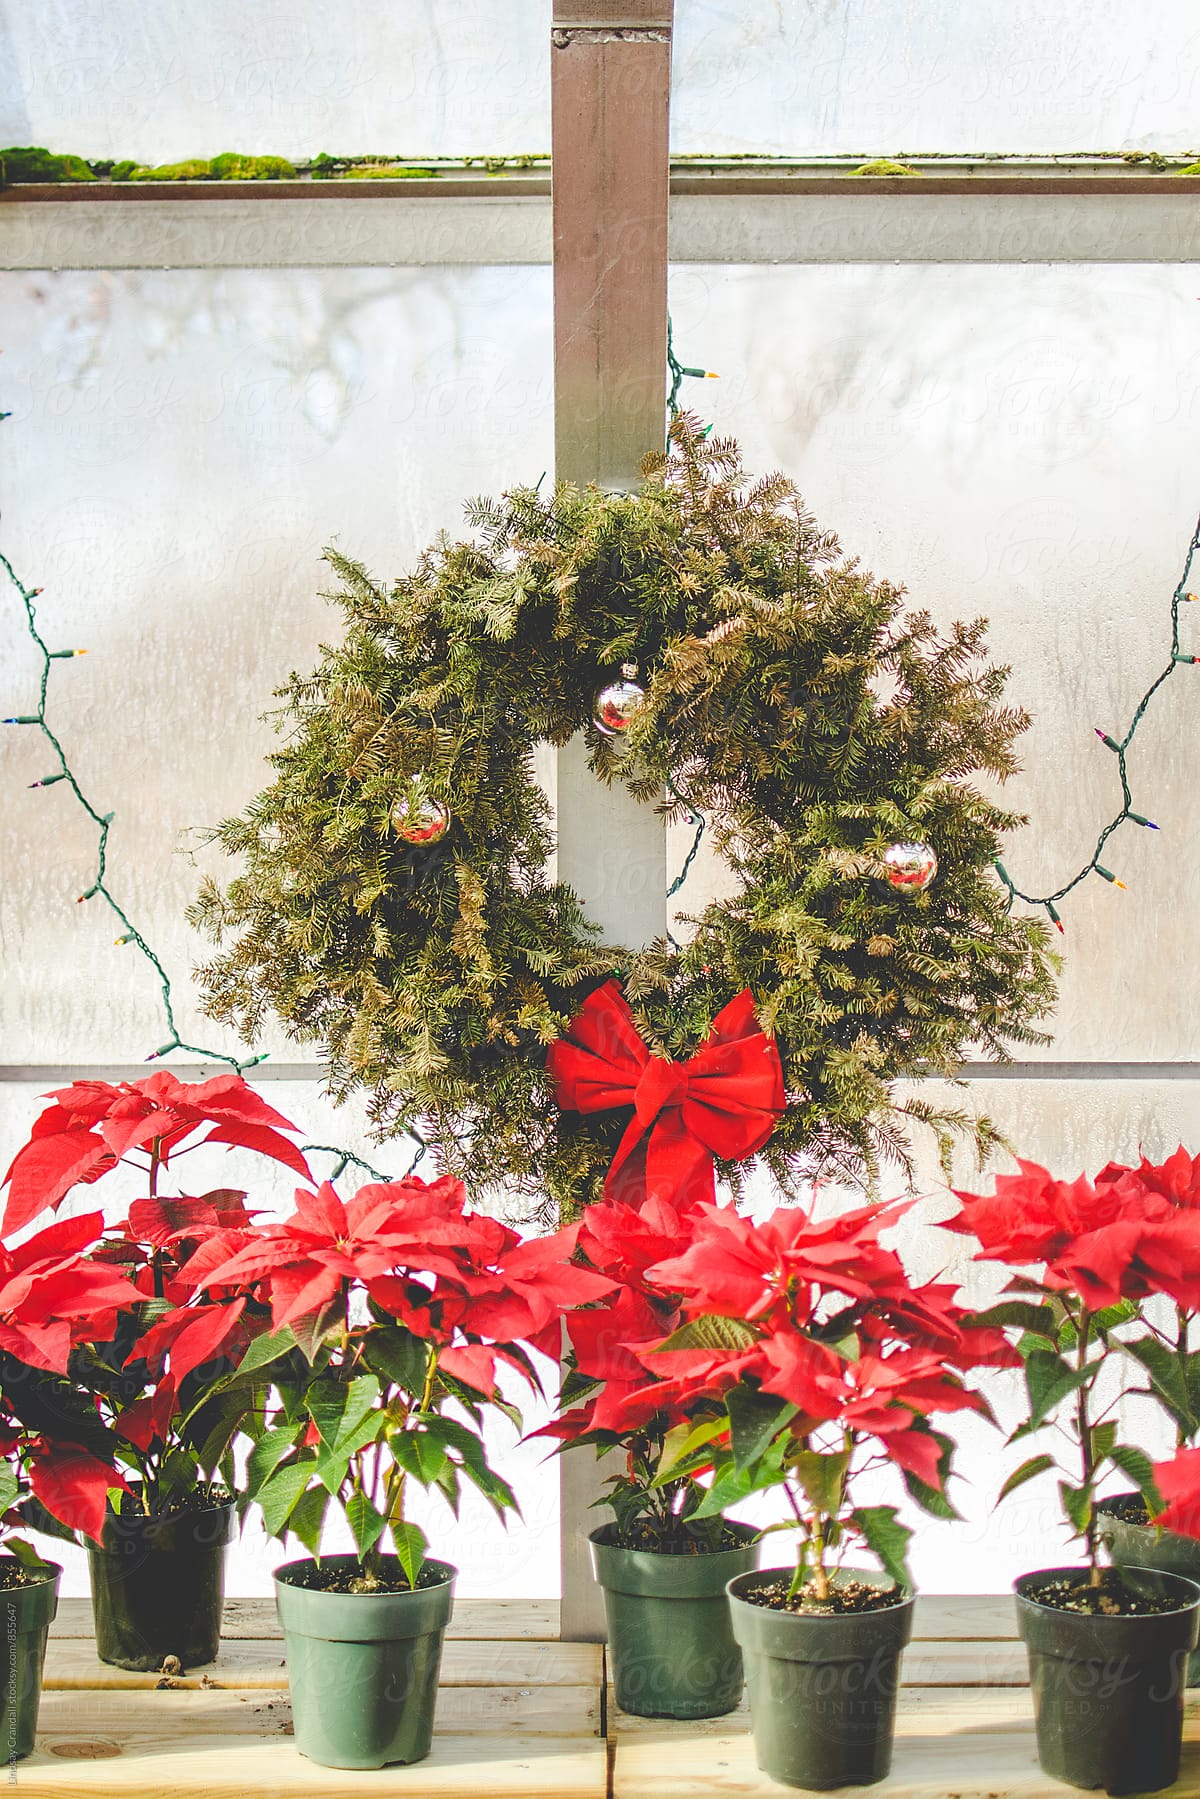 Wreath and poinsettias inside conservatory